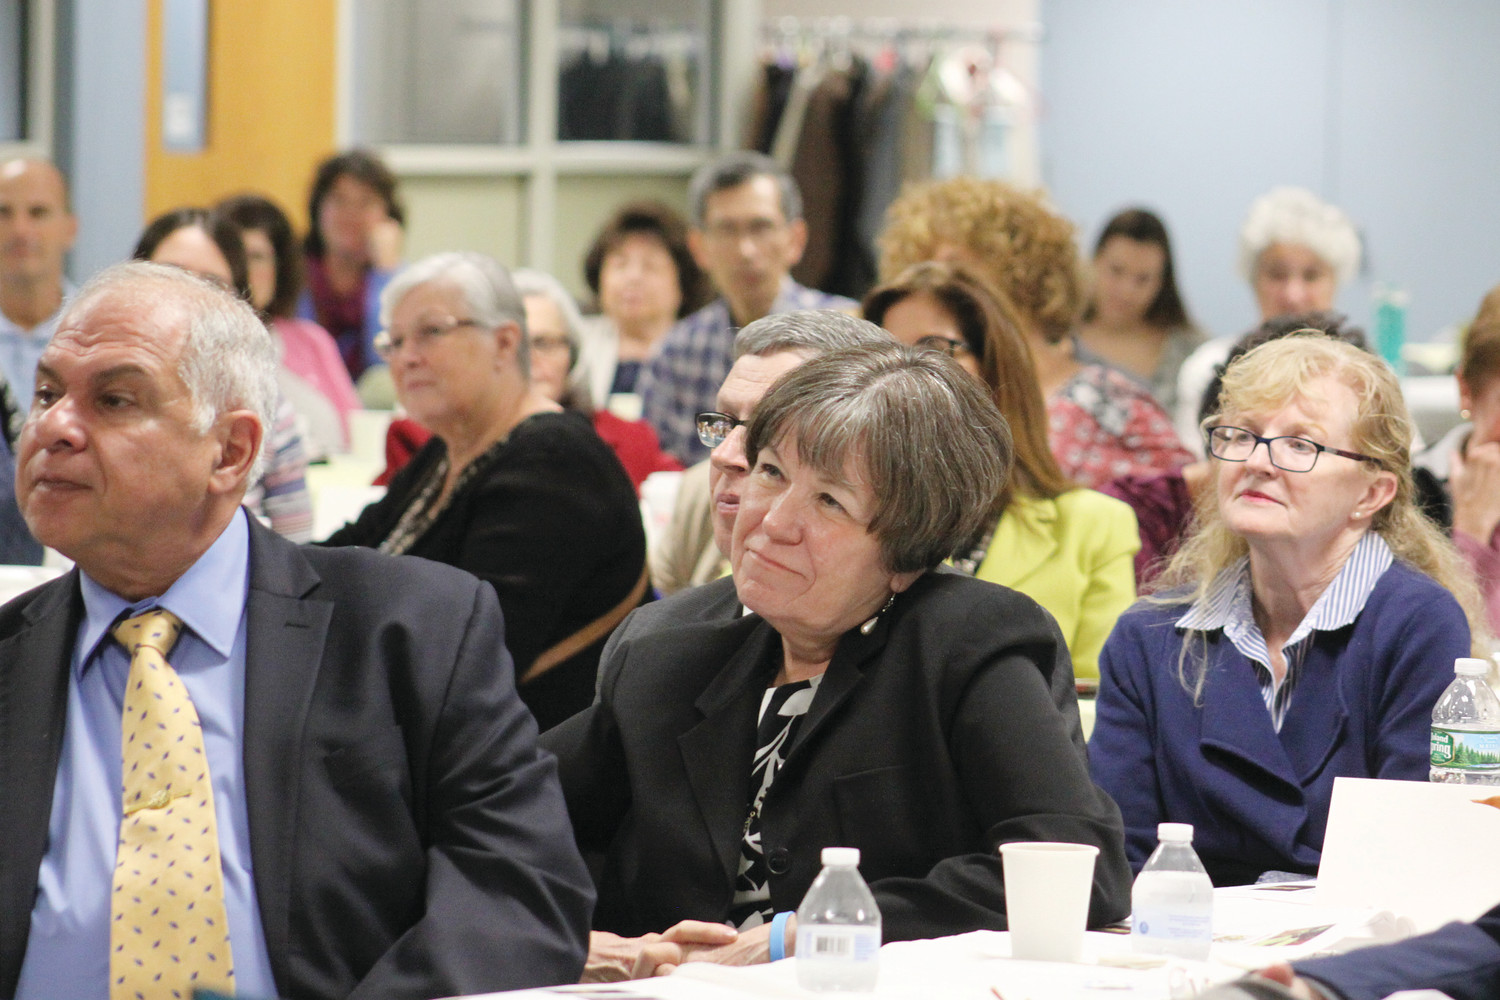 Pro-life advocates from parishes throughout the diocese listened during a talk by Father Nicholas Fleming.